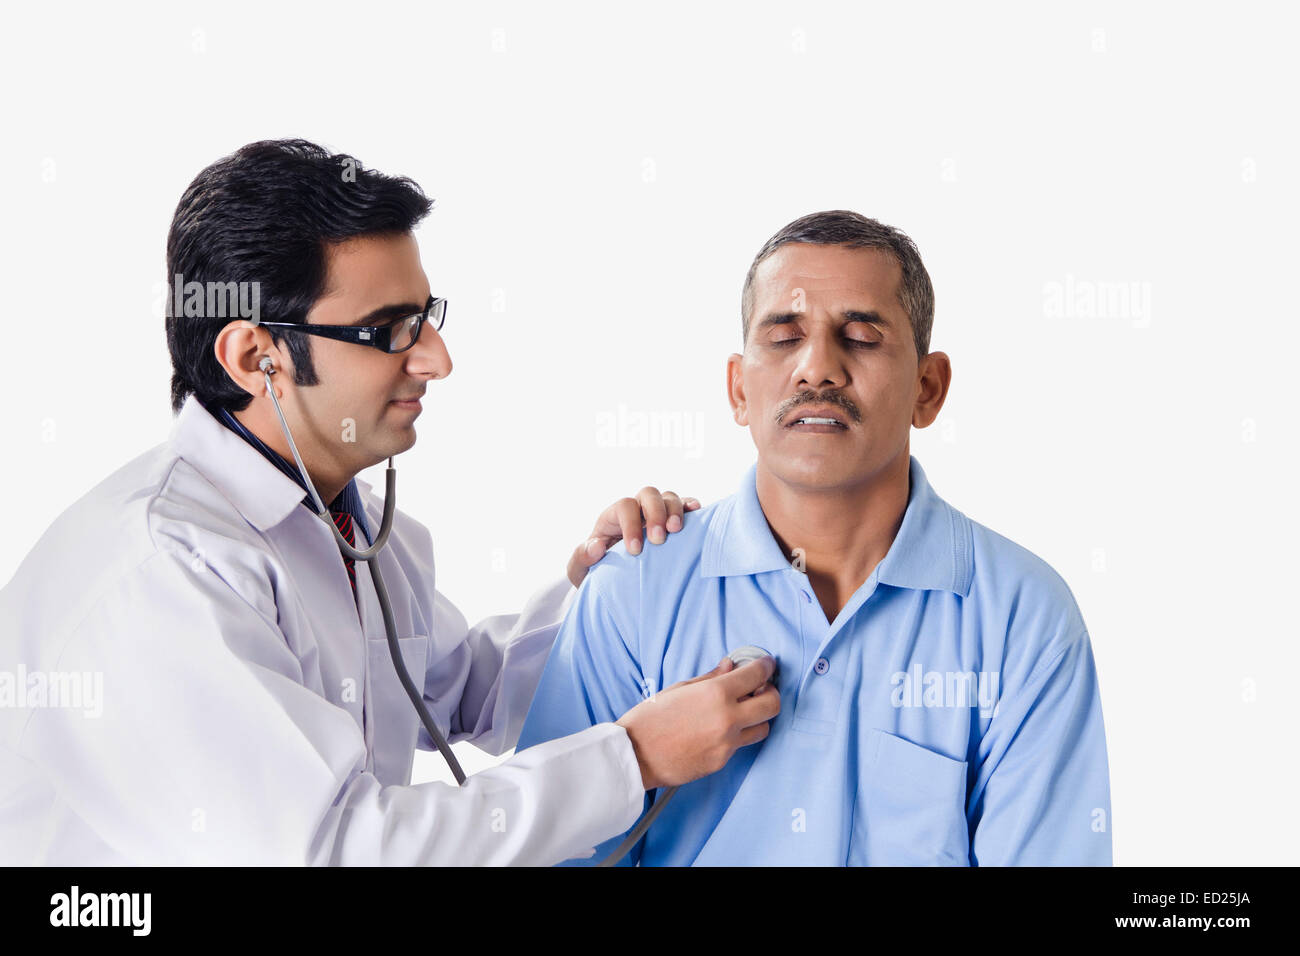 indian Medical Doctor Patient Treatment Stock Photo